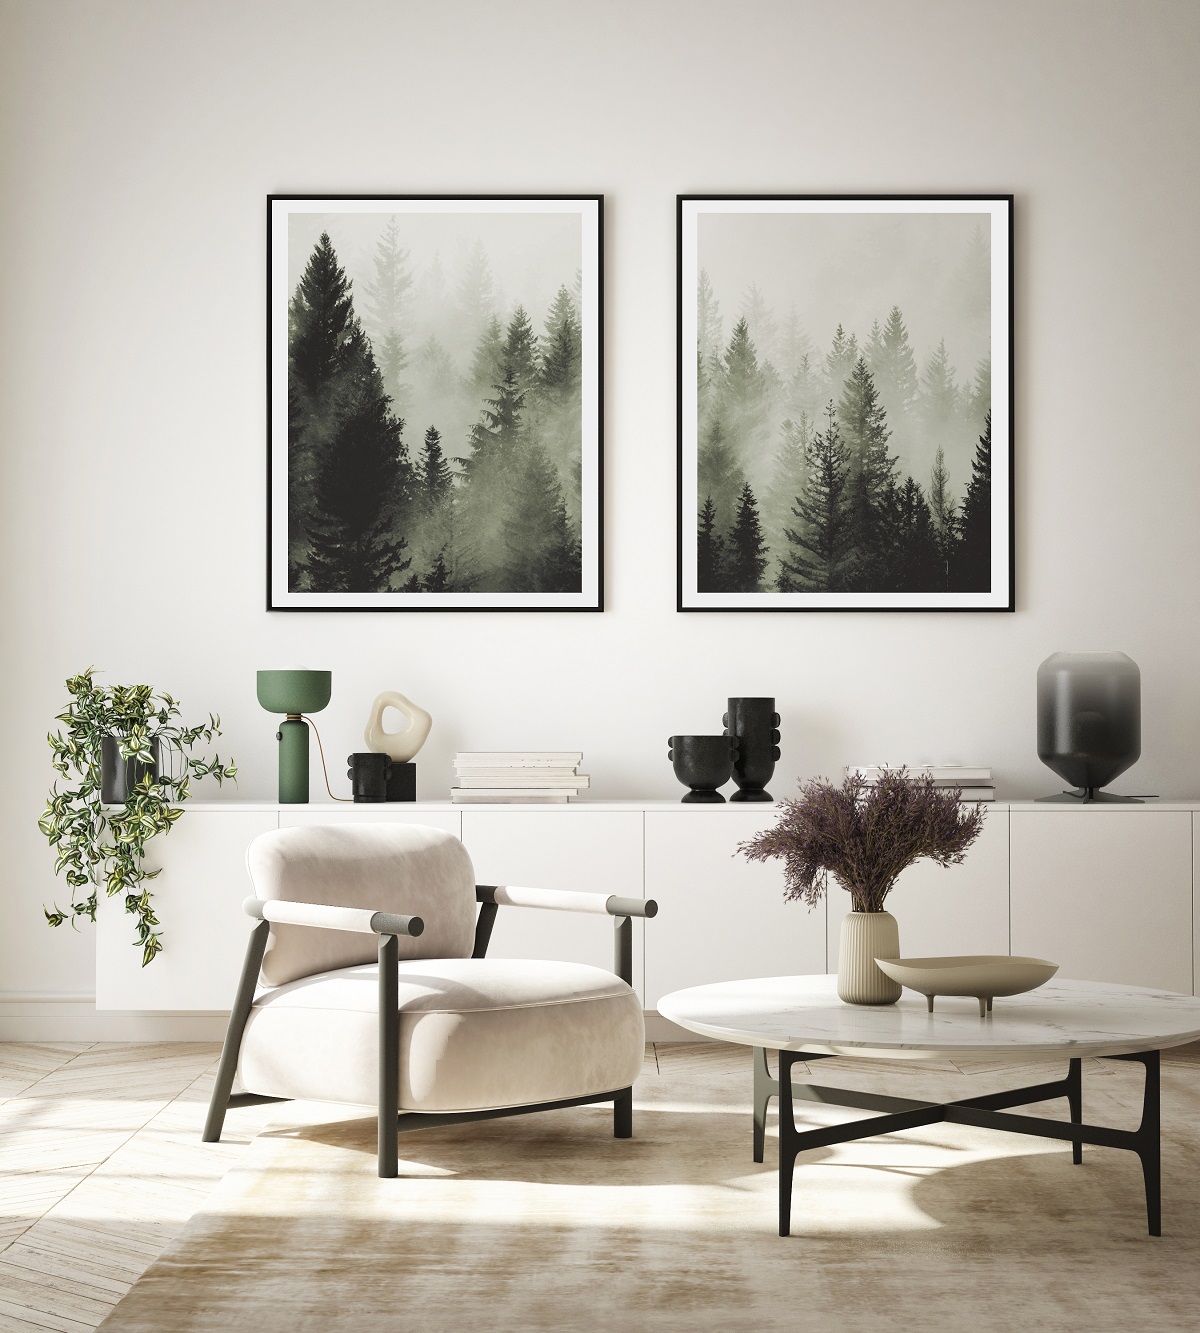 Wilderness range of WallArt by Newmor framed in a contemporary style white interior